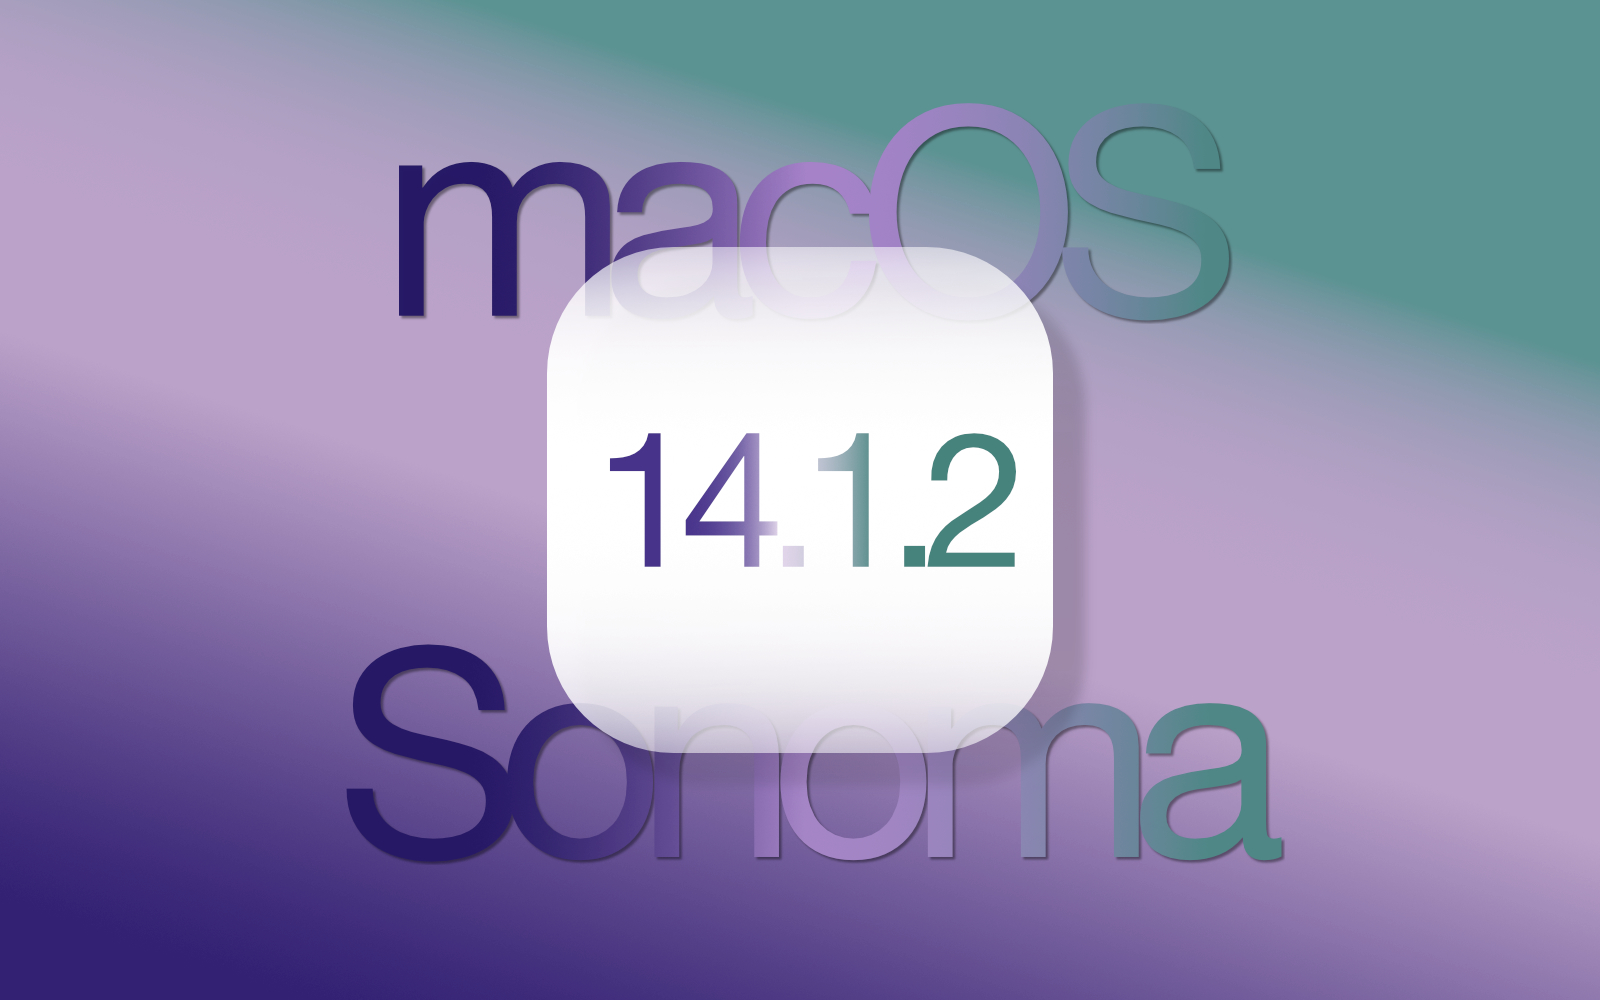 macos-Sonoma-14_1_2-official-release.jpg